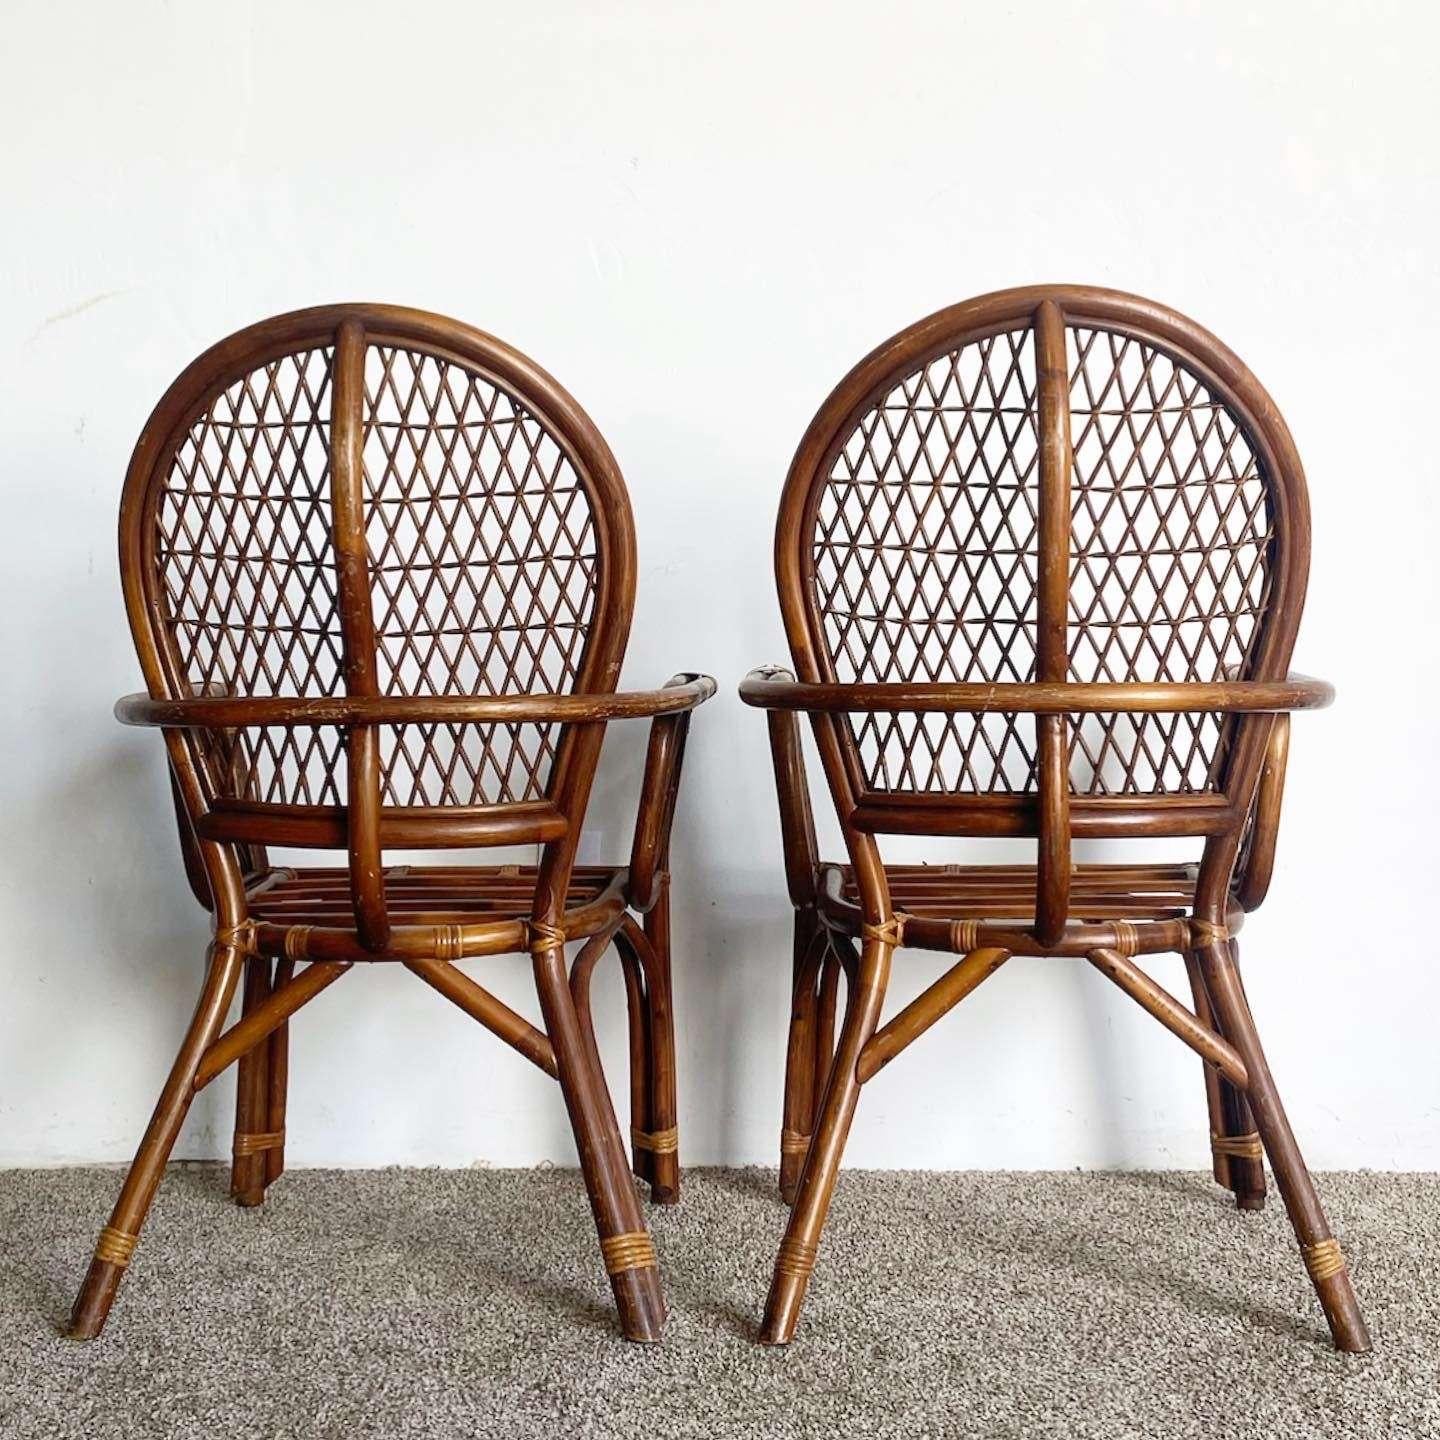 Boho Chic Bamboo Rattan Balloon Back Arm Chairs - Set of 4 In Good Condition For Sale In Delray Beach, FL